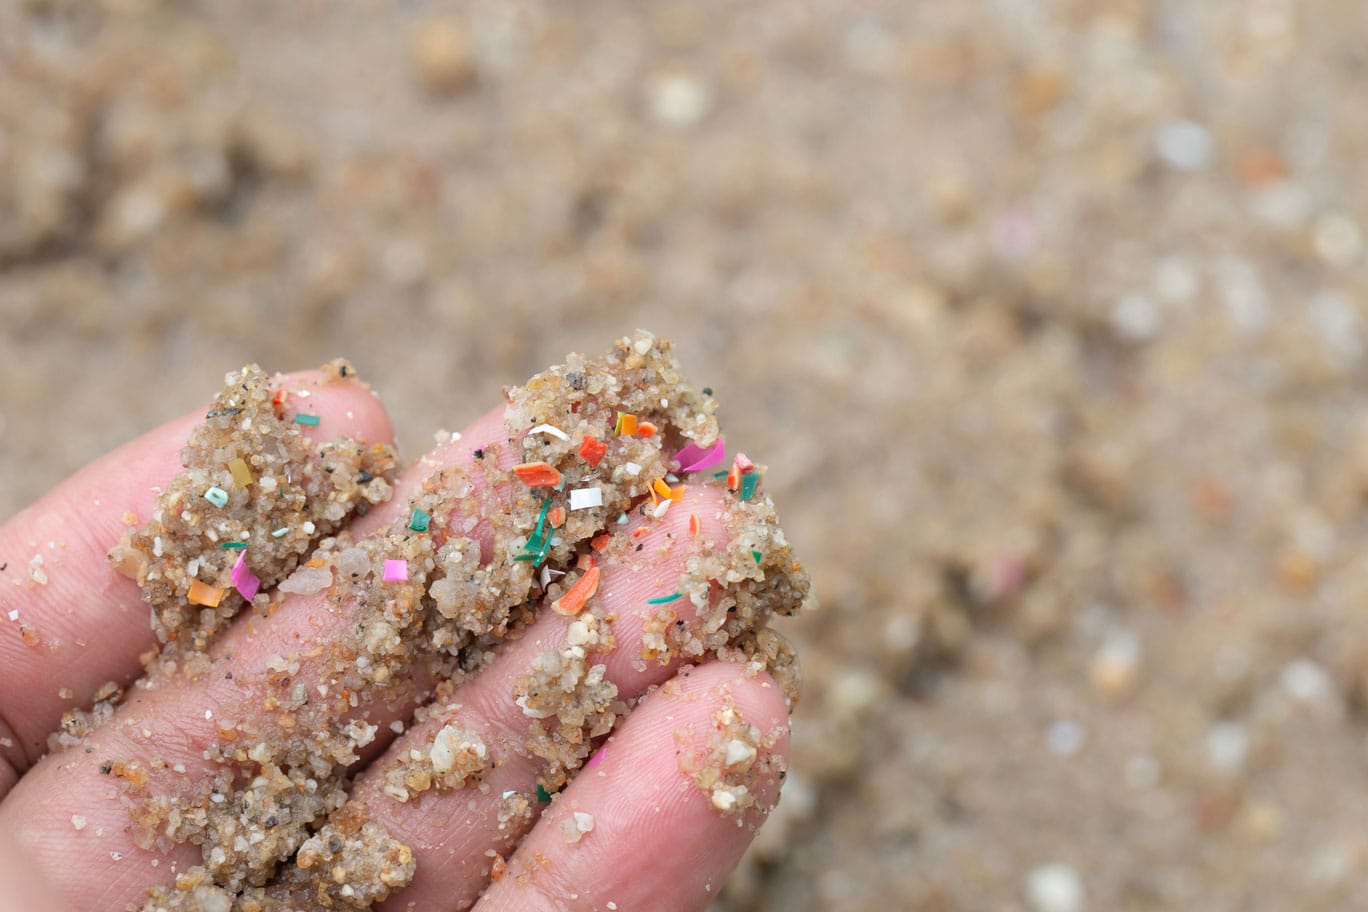 Showcase Image for Plastics Unleashed: Assessing Microplastic Environmental Impacts and Remobilization Risks in Freshwater Sediments